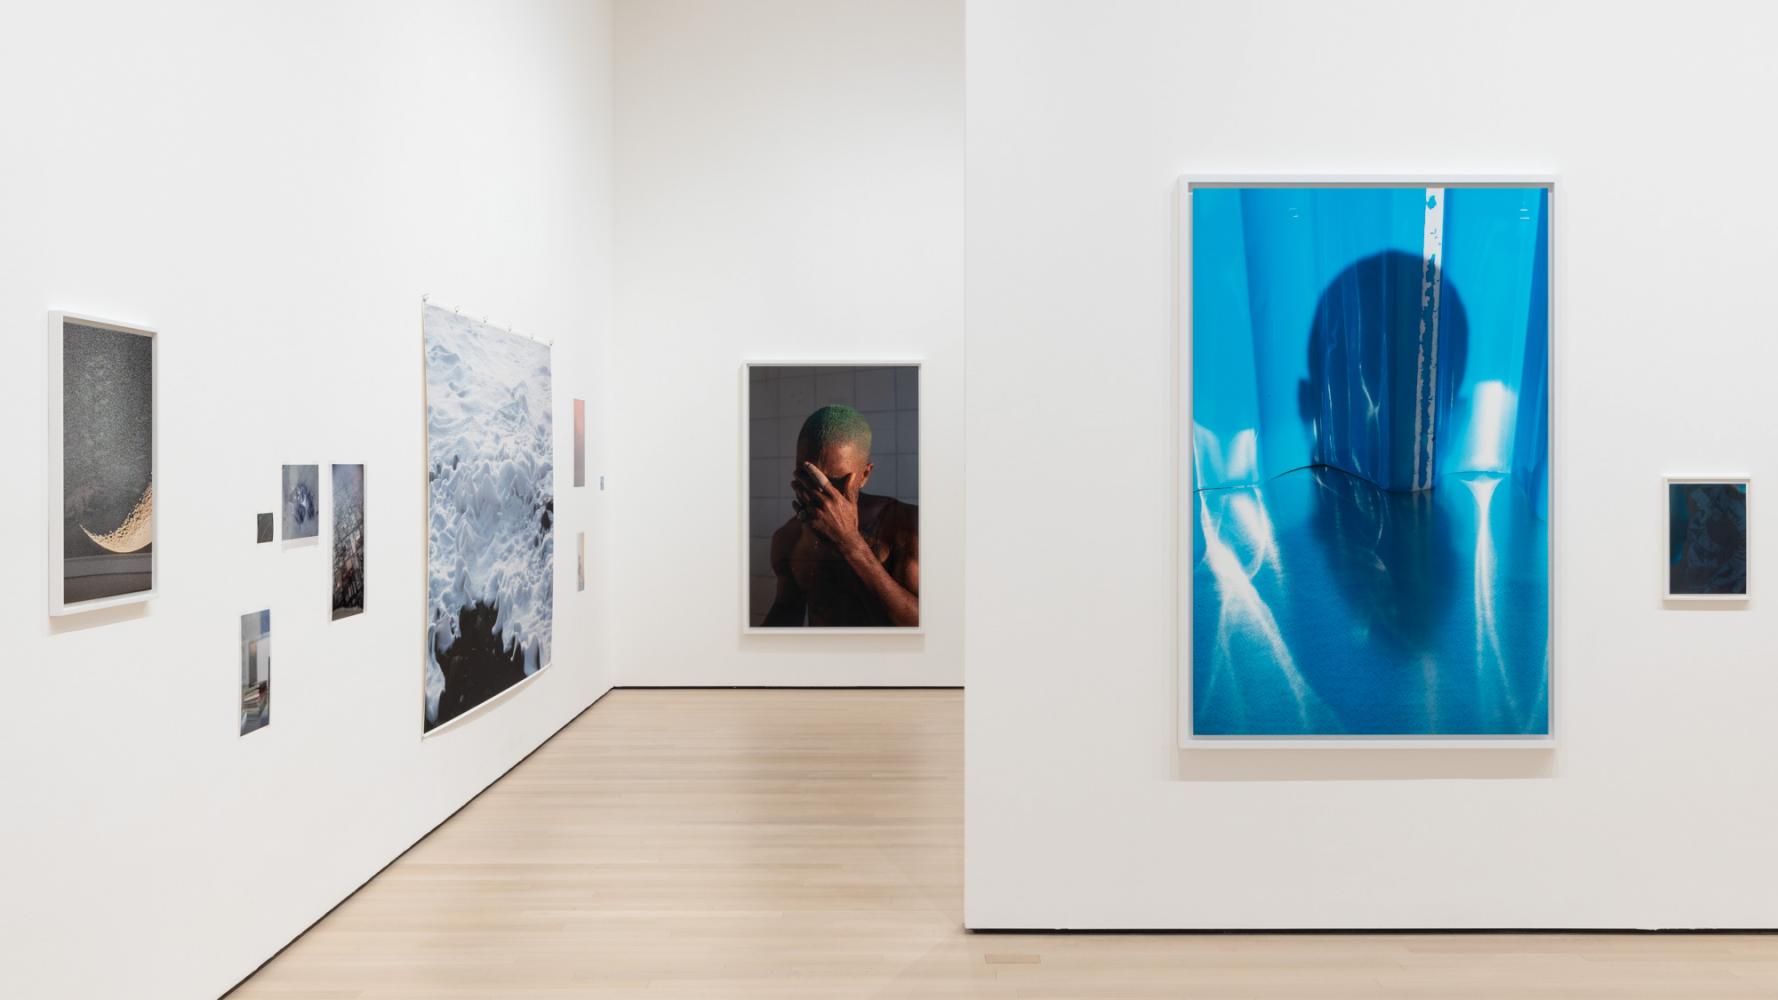 Wolfgang Tillmans "To look without fear", Installationsansicht MoMa, New York, 2022